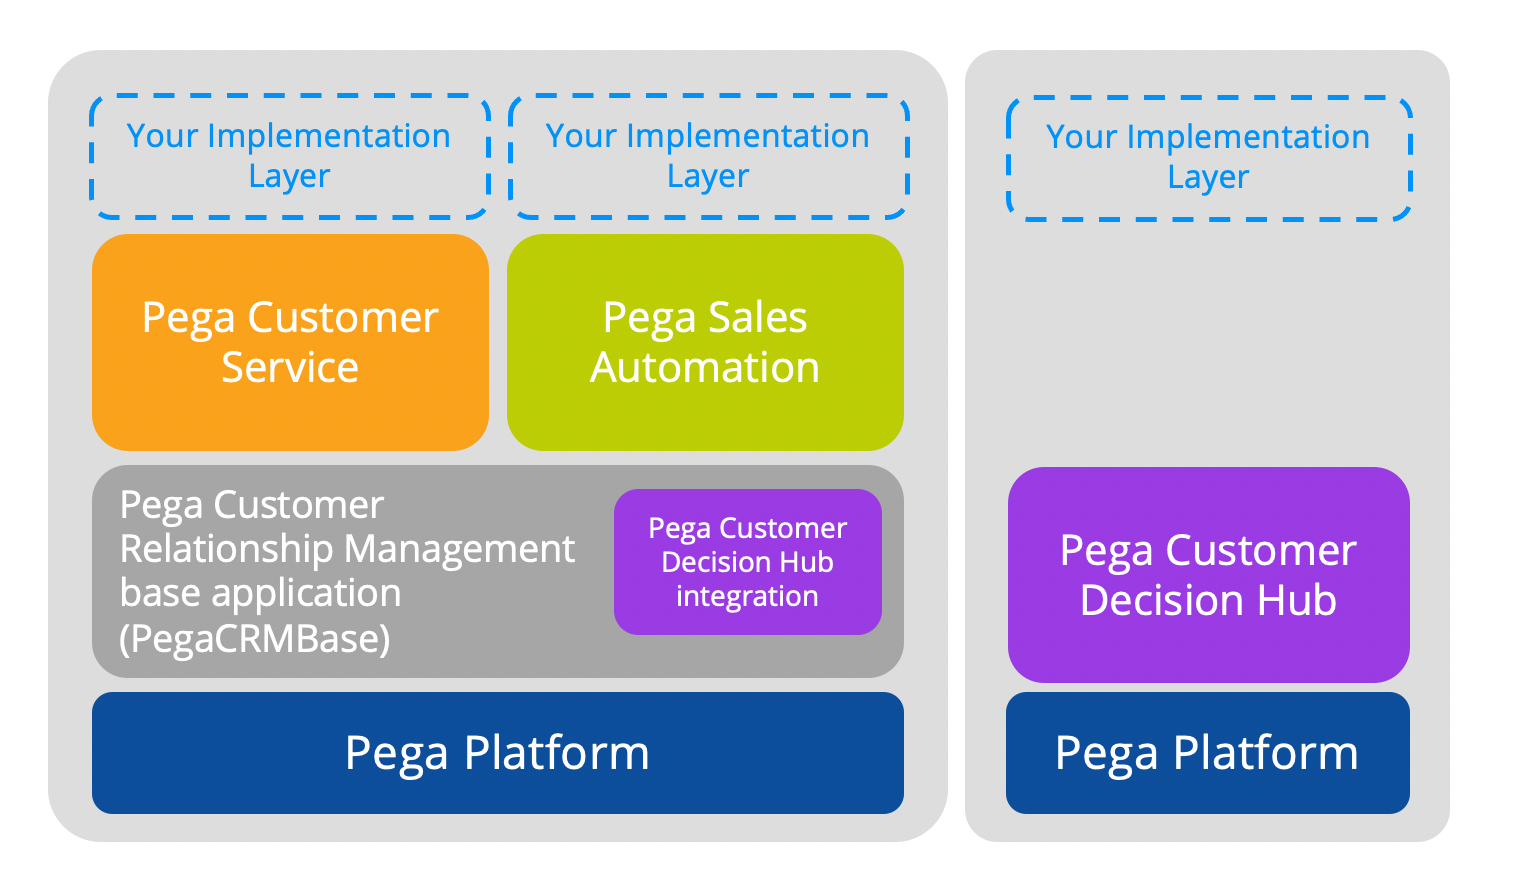 The application layers that make up the application stack for the CRM applications, starting with the Pega Platform